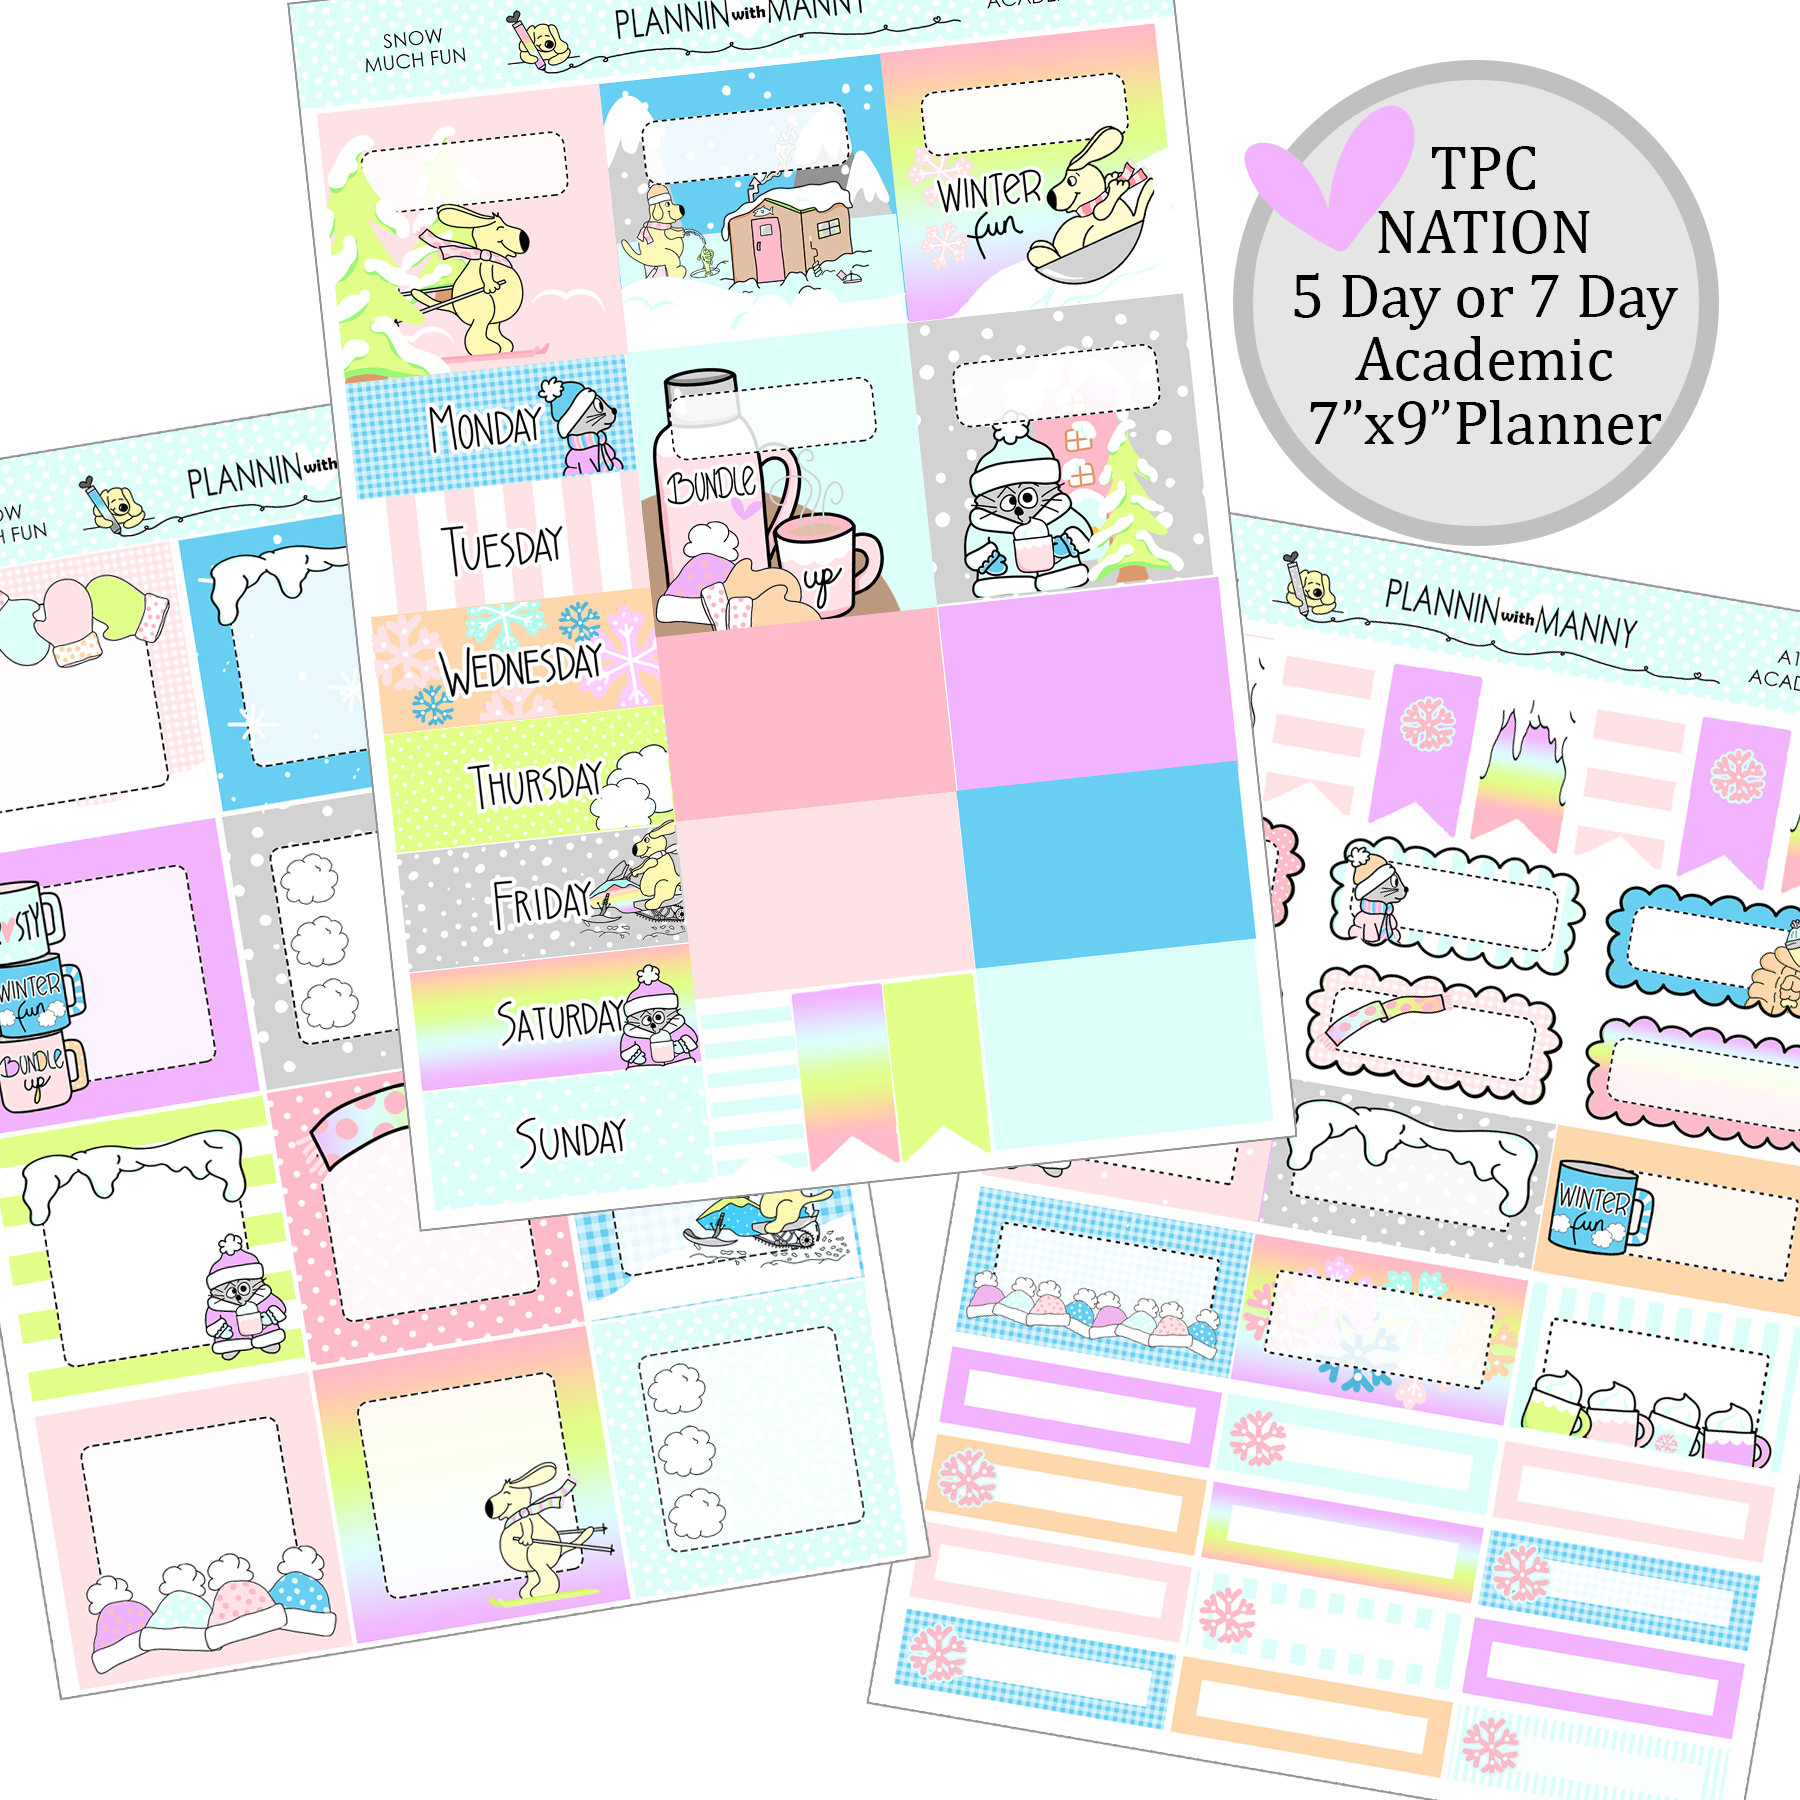 A124 TPC ACADEMIC 5 & 7 Day Weekly Planner Kit - Snow Much Fun Collection